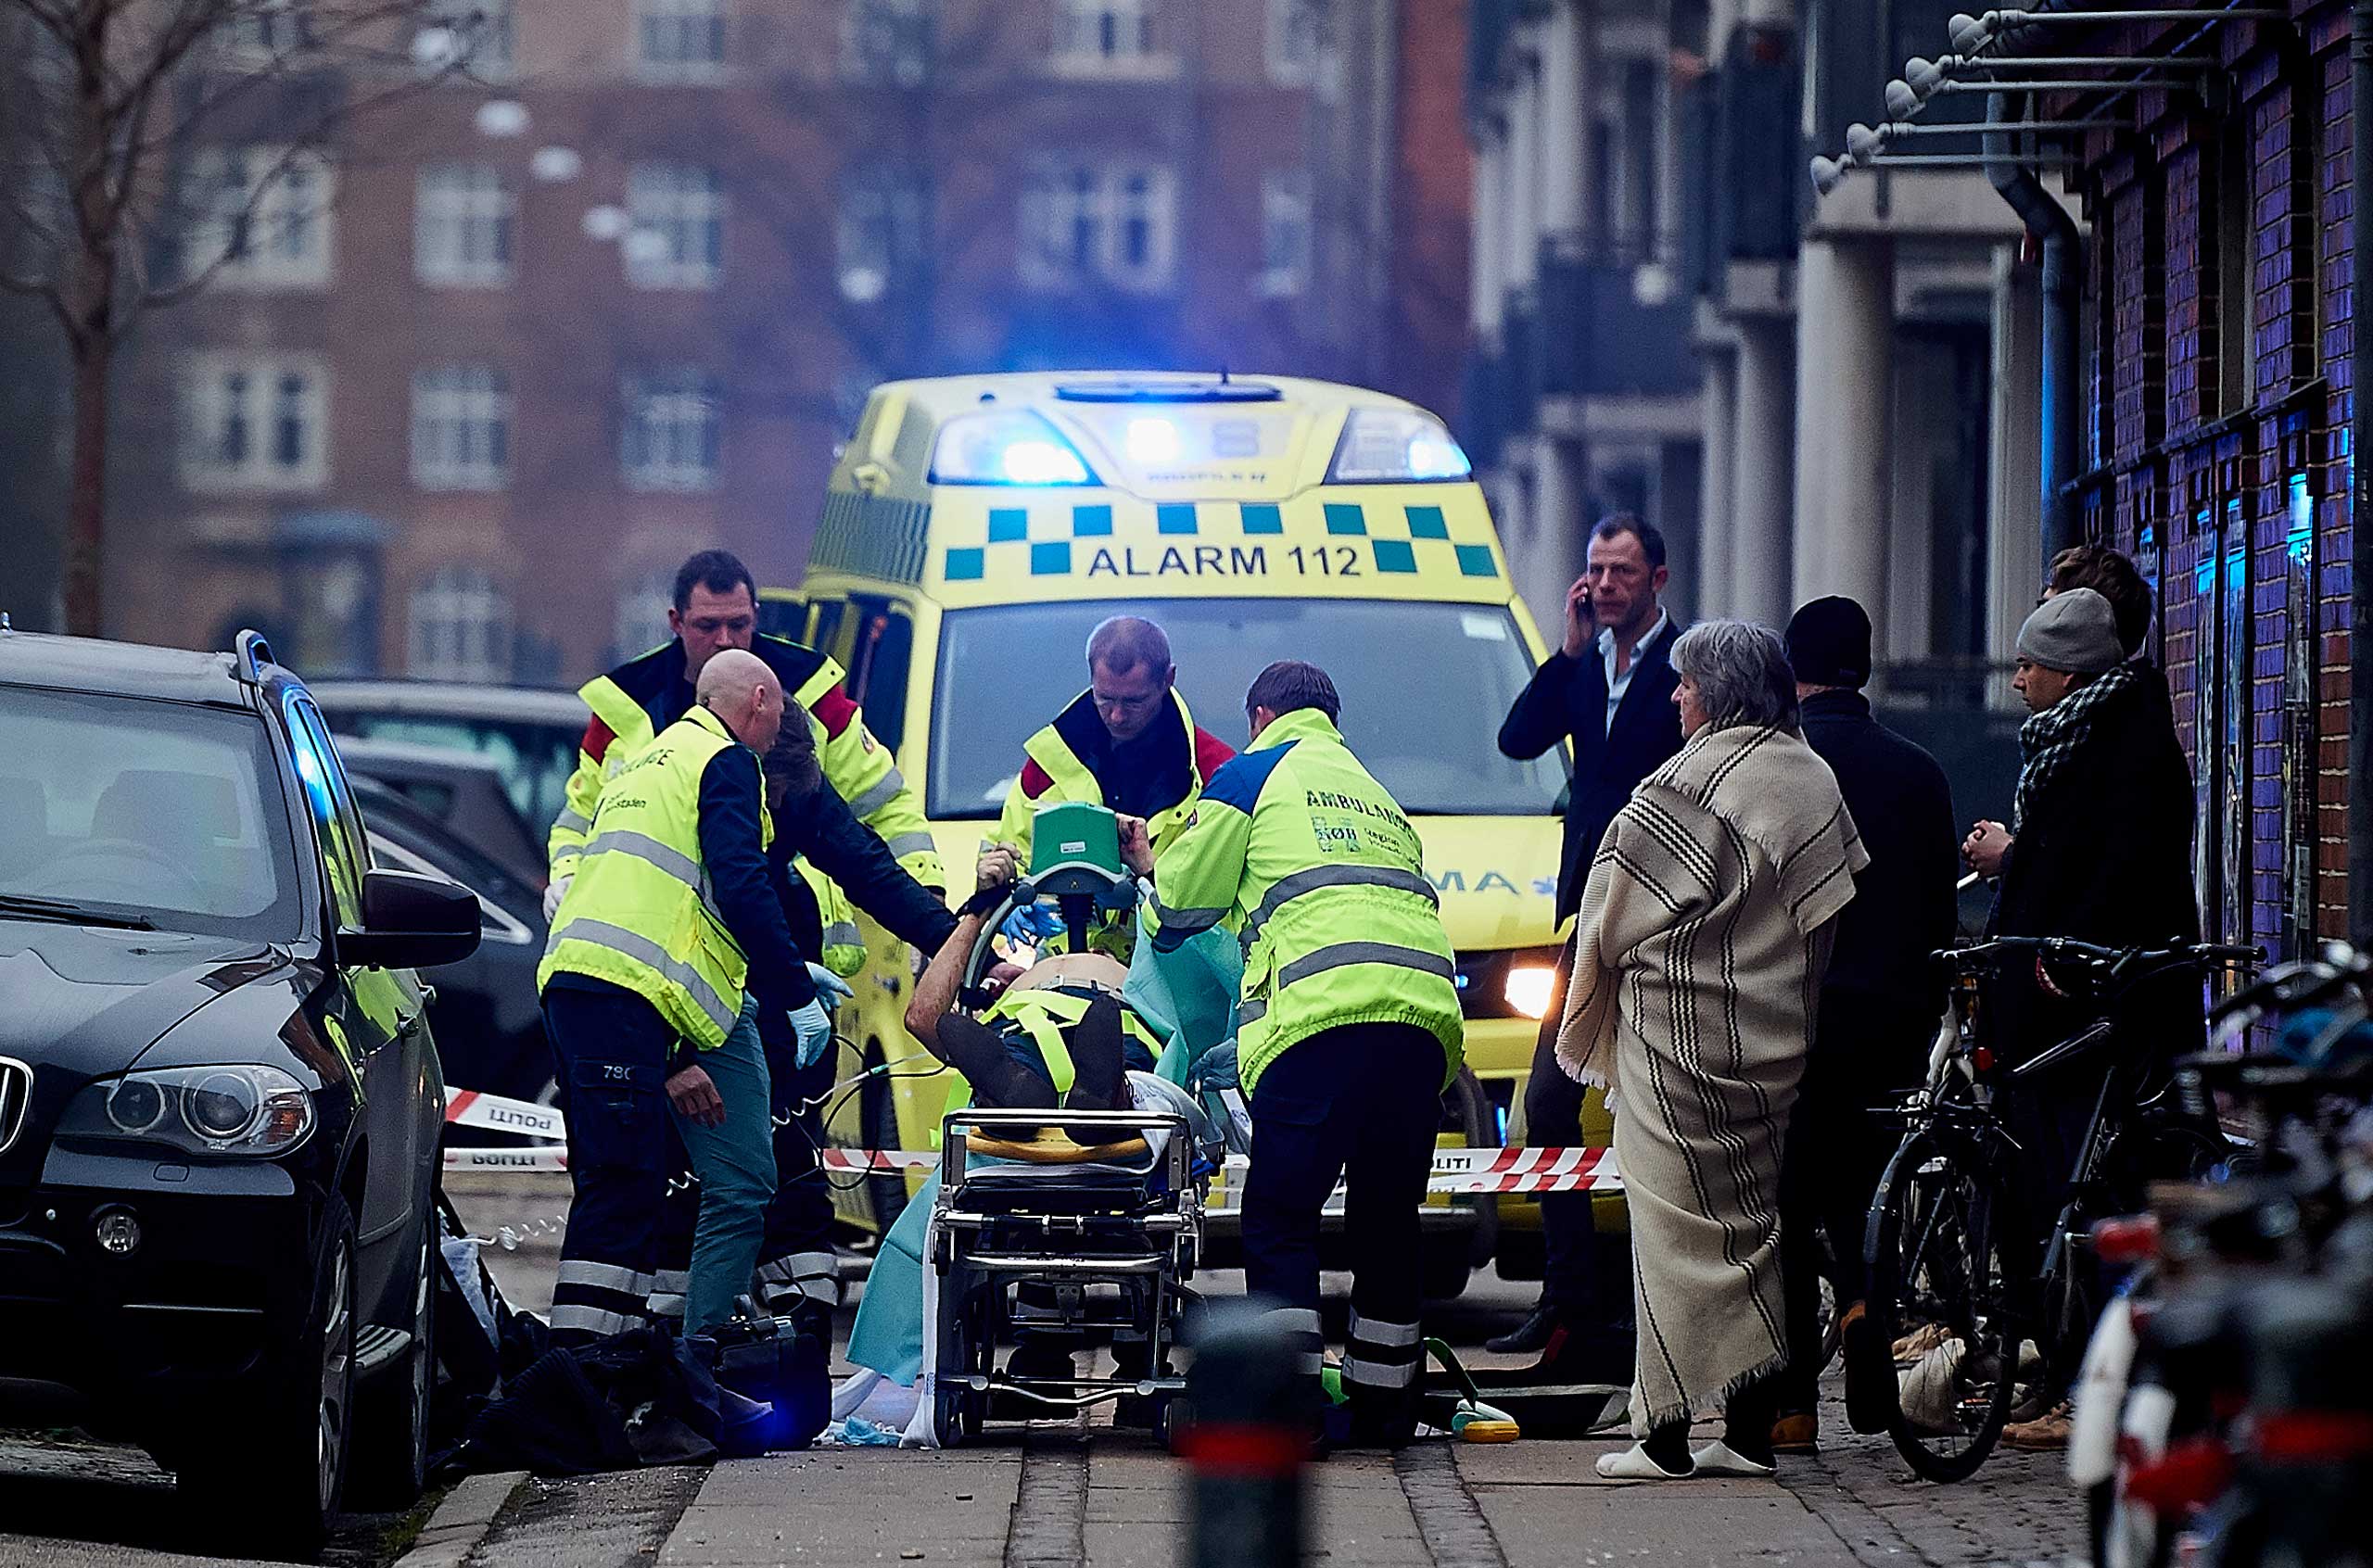 A victim is carried into an ambulance after a shooting at a public meeting and discussion arranged by the Lars Vilks Committee about Charlie Hebdo and freedom of speech on Feb. 14, 2015 in Copenhagen. (Lars Ronbog—Getty Images)